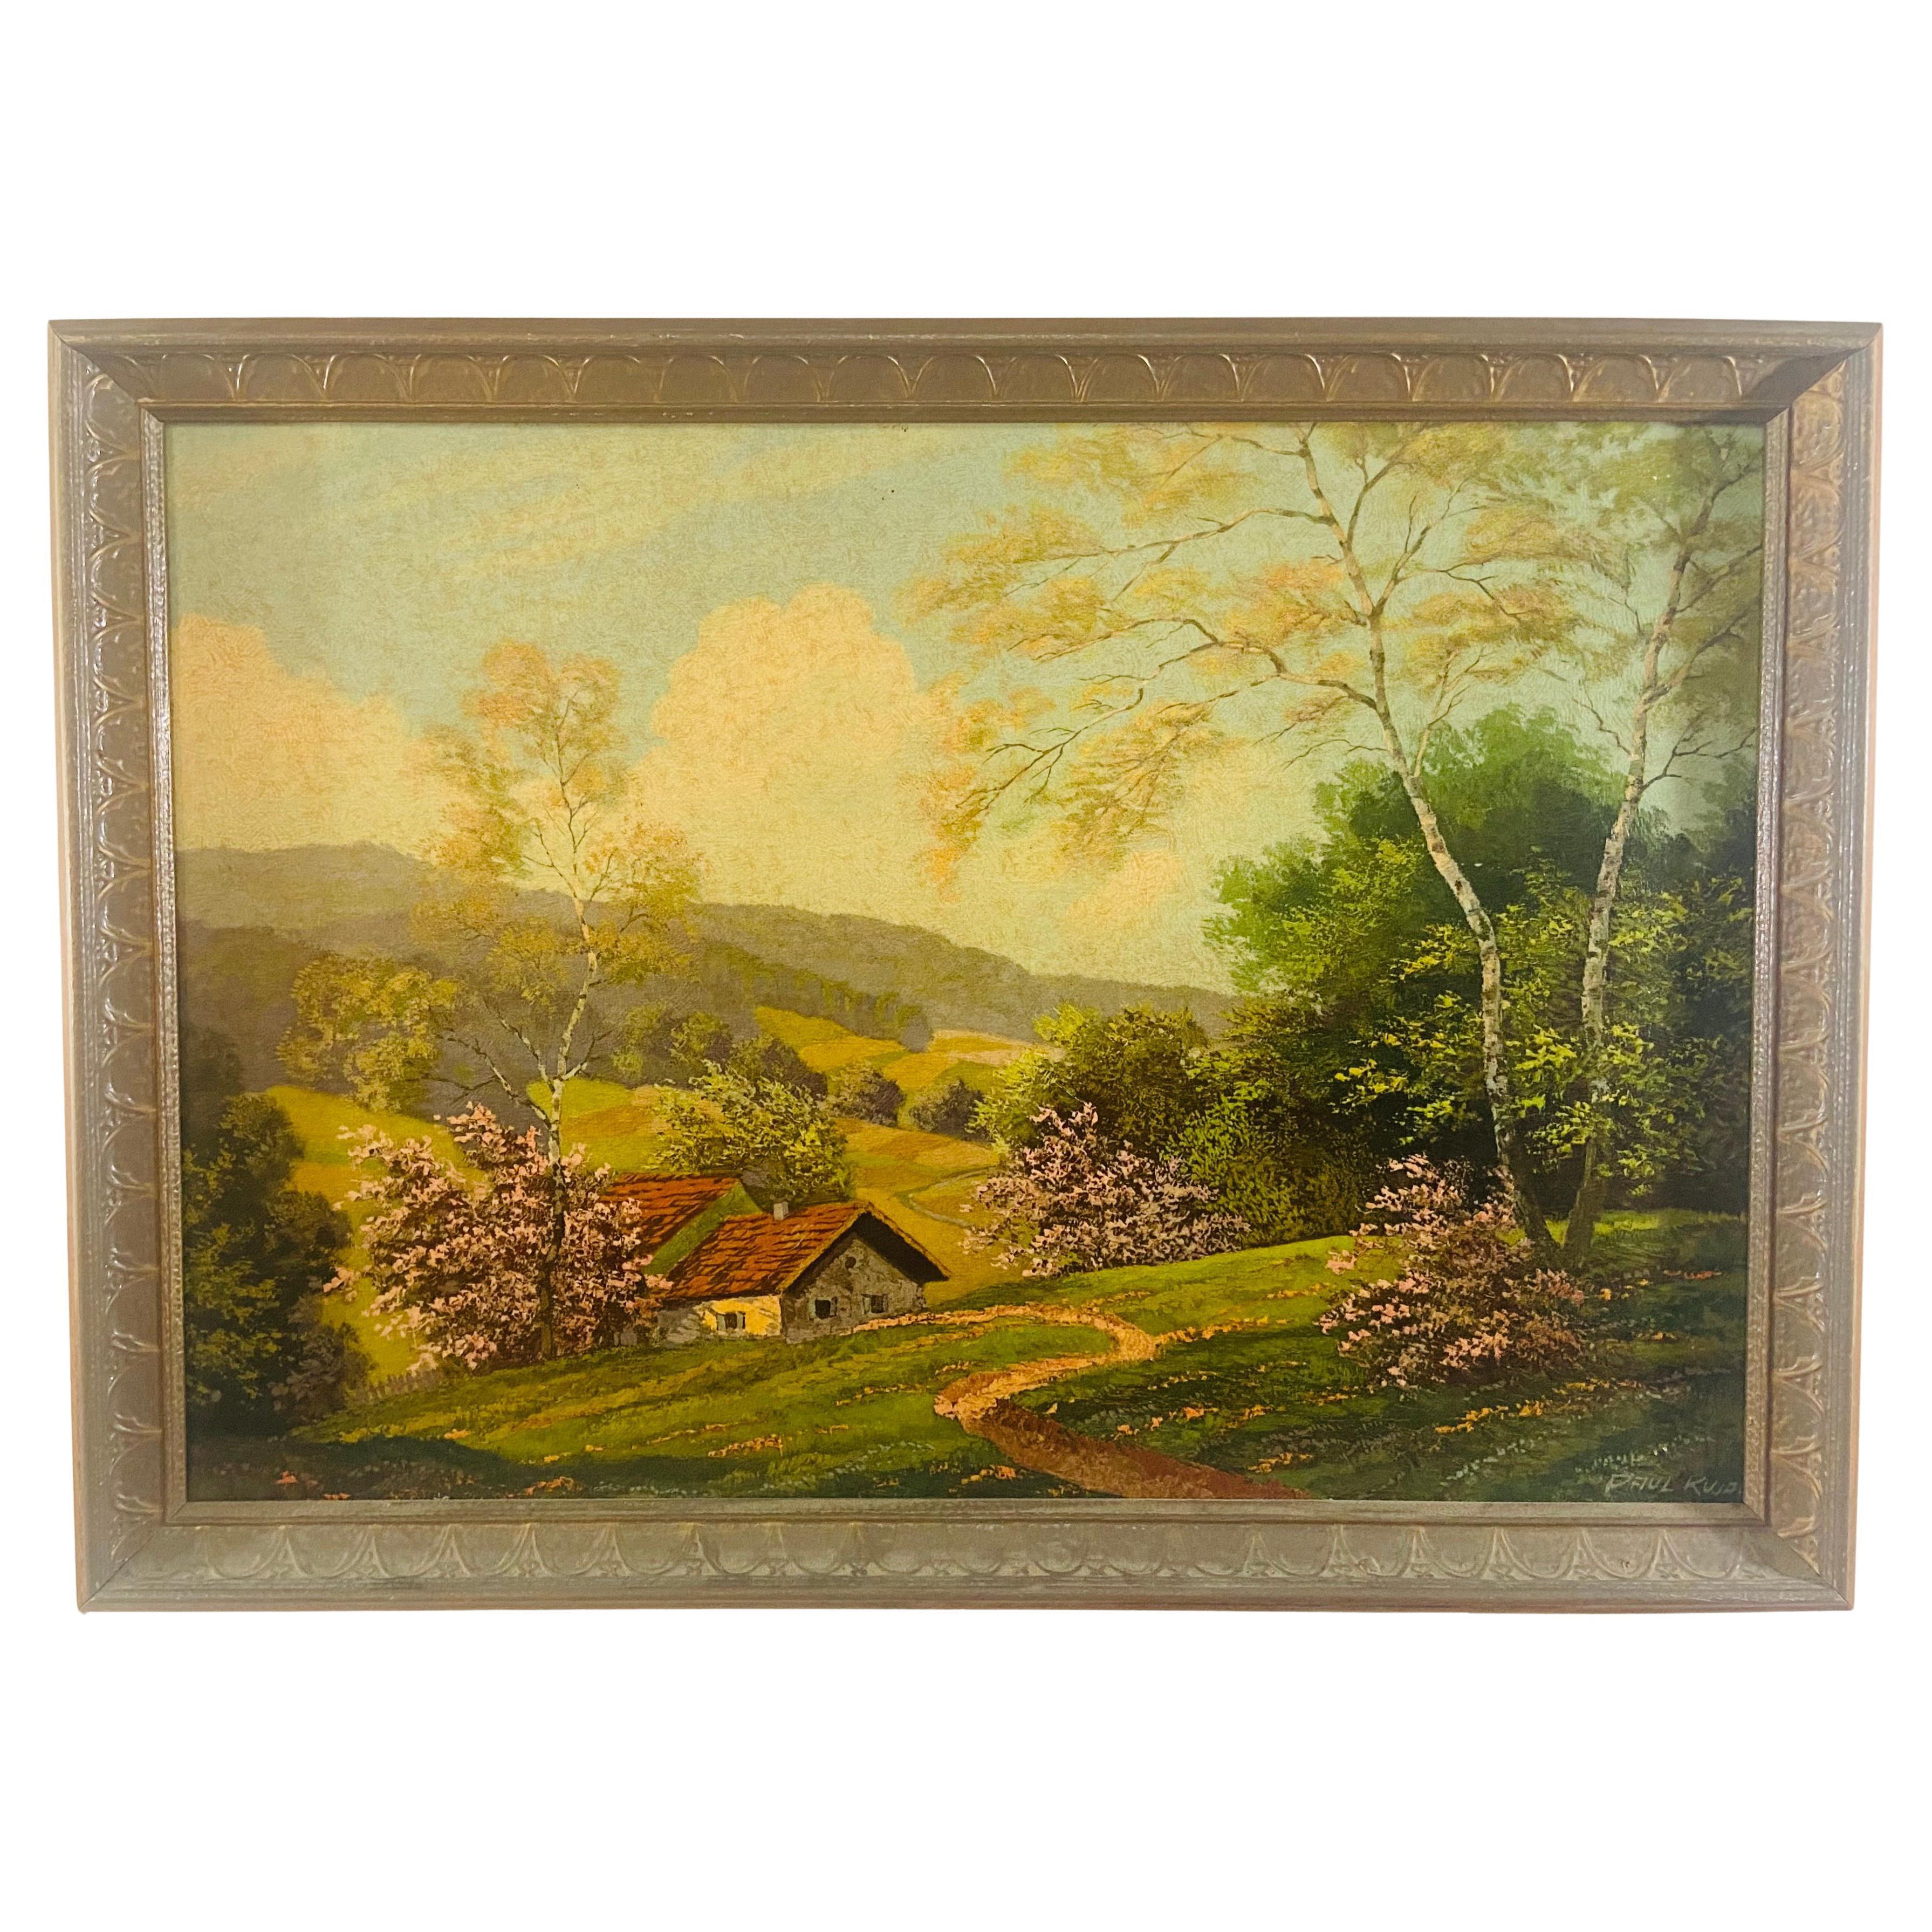 An oil on board landscape painting by artist Paul Kujal Austria (1894 - 1965). The painting depicts a serene scene of a cottage home in what it looks like a European village in the mountain area during the spring. Green trees , plants and blooming